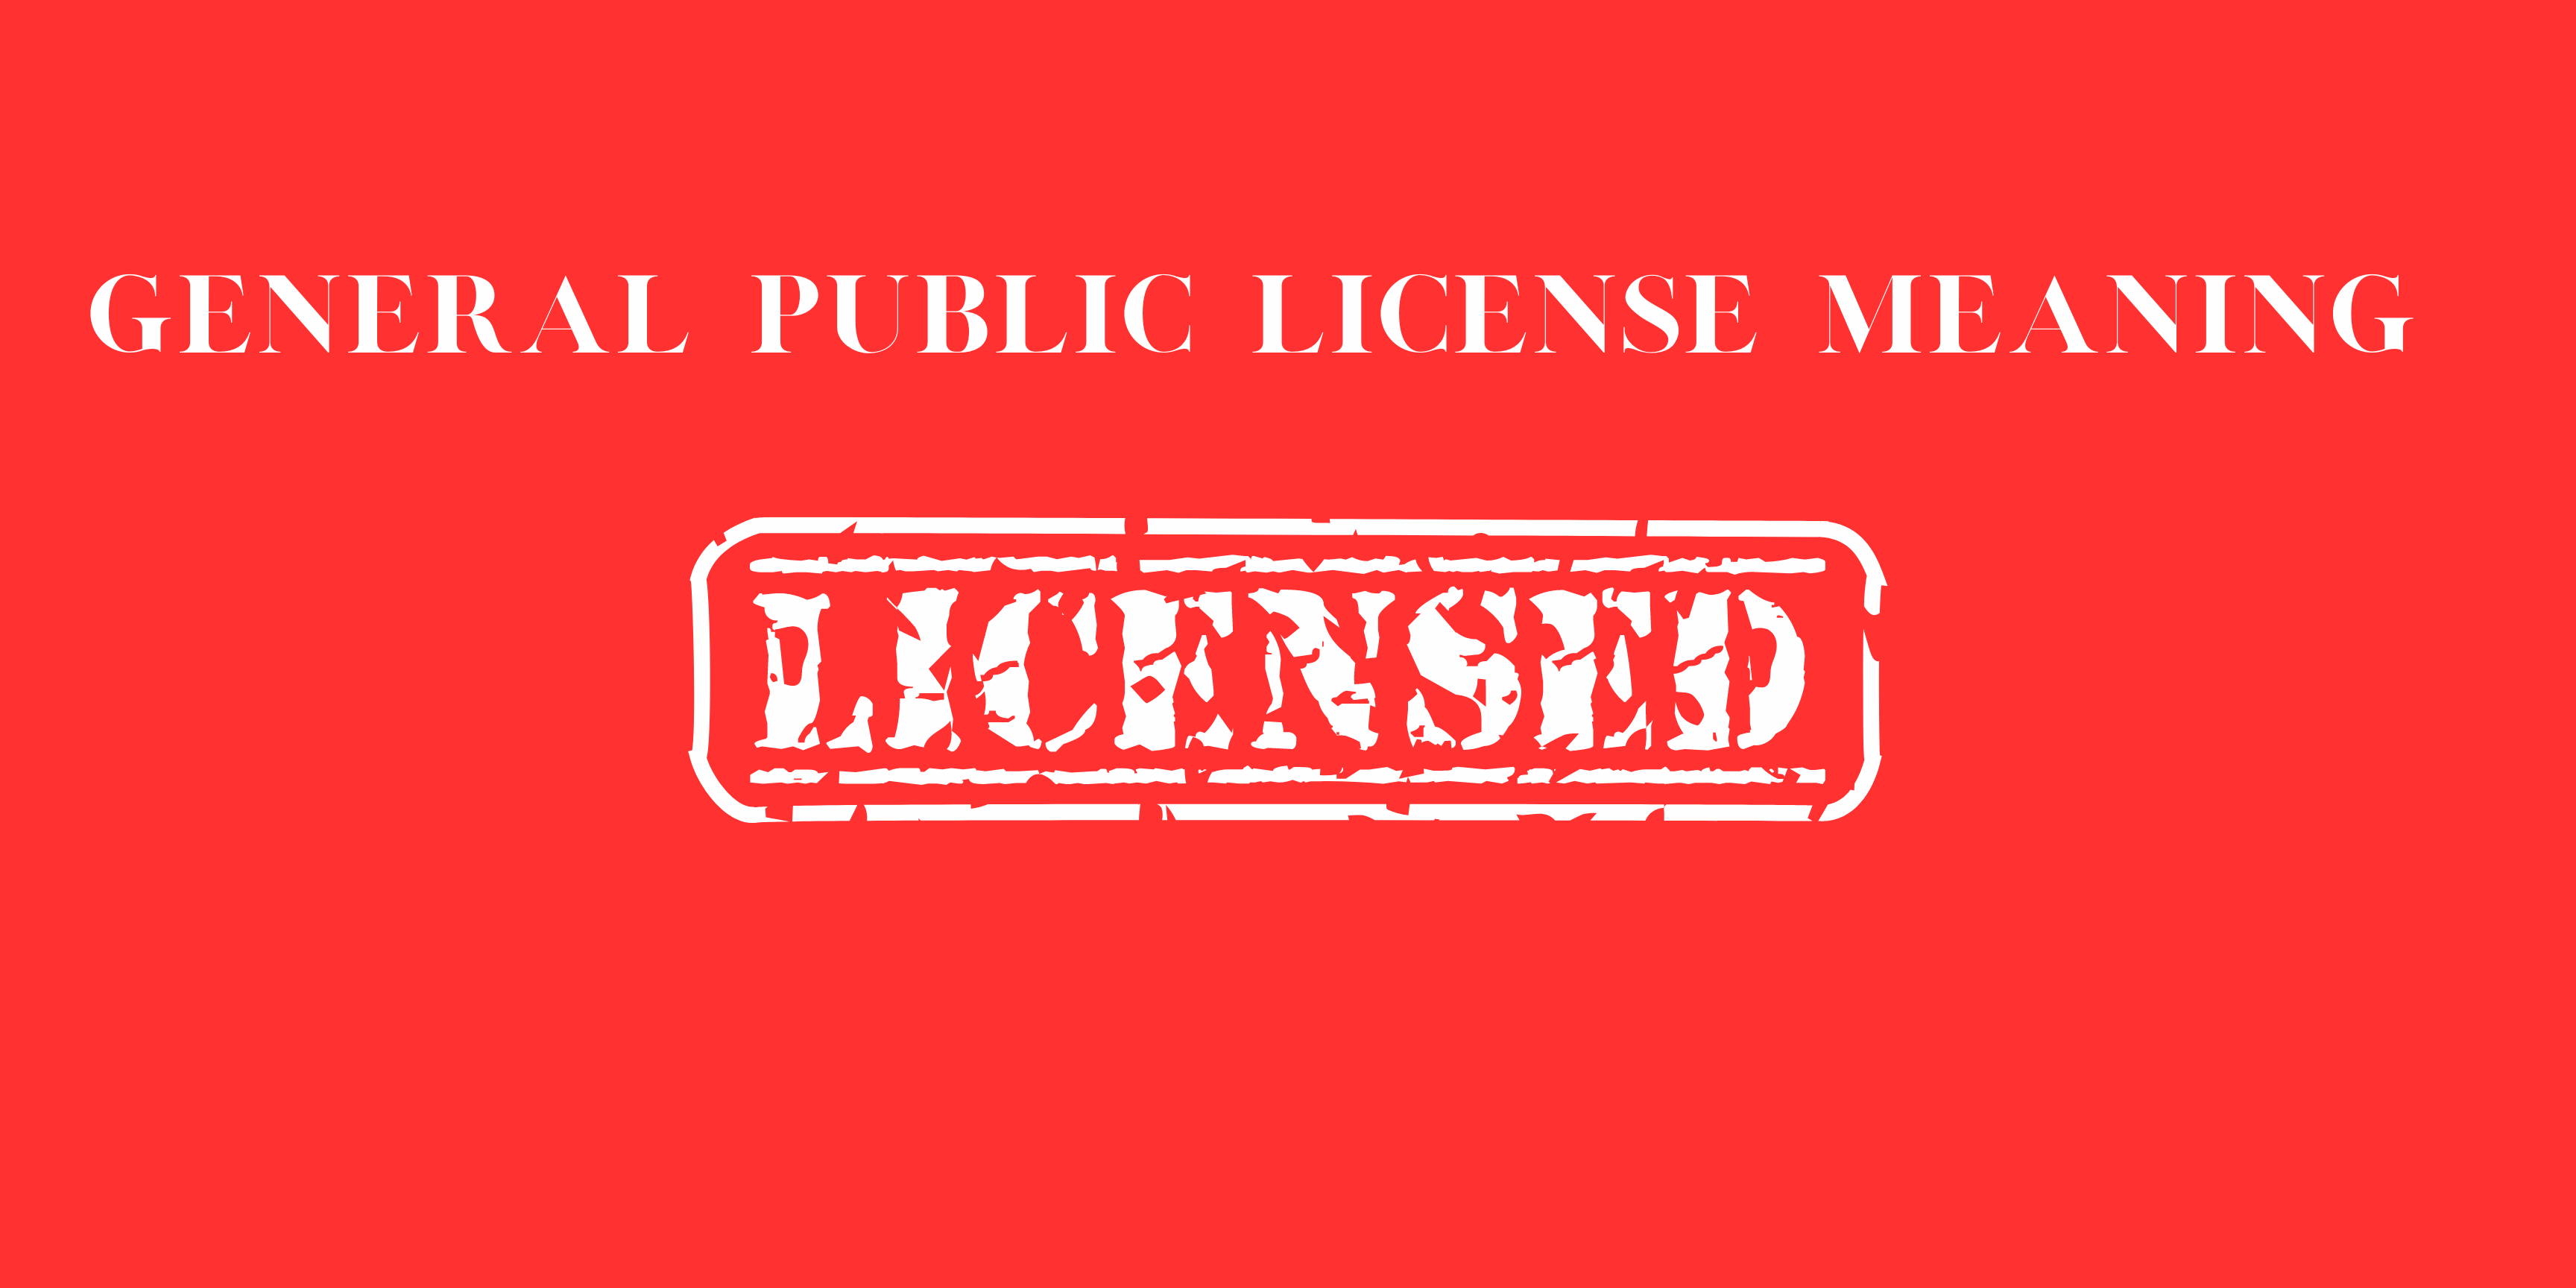 General Public License Meaning